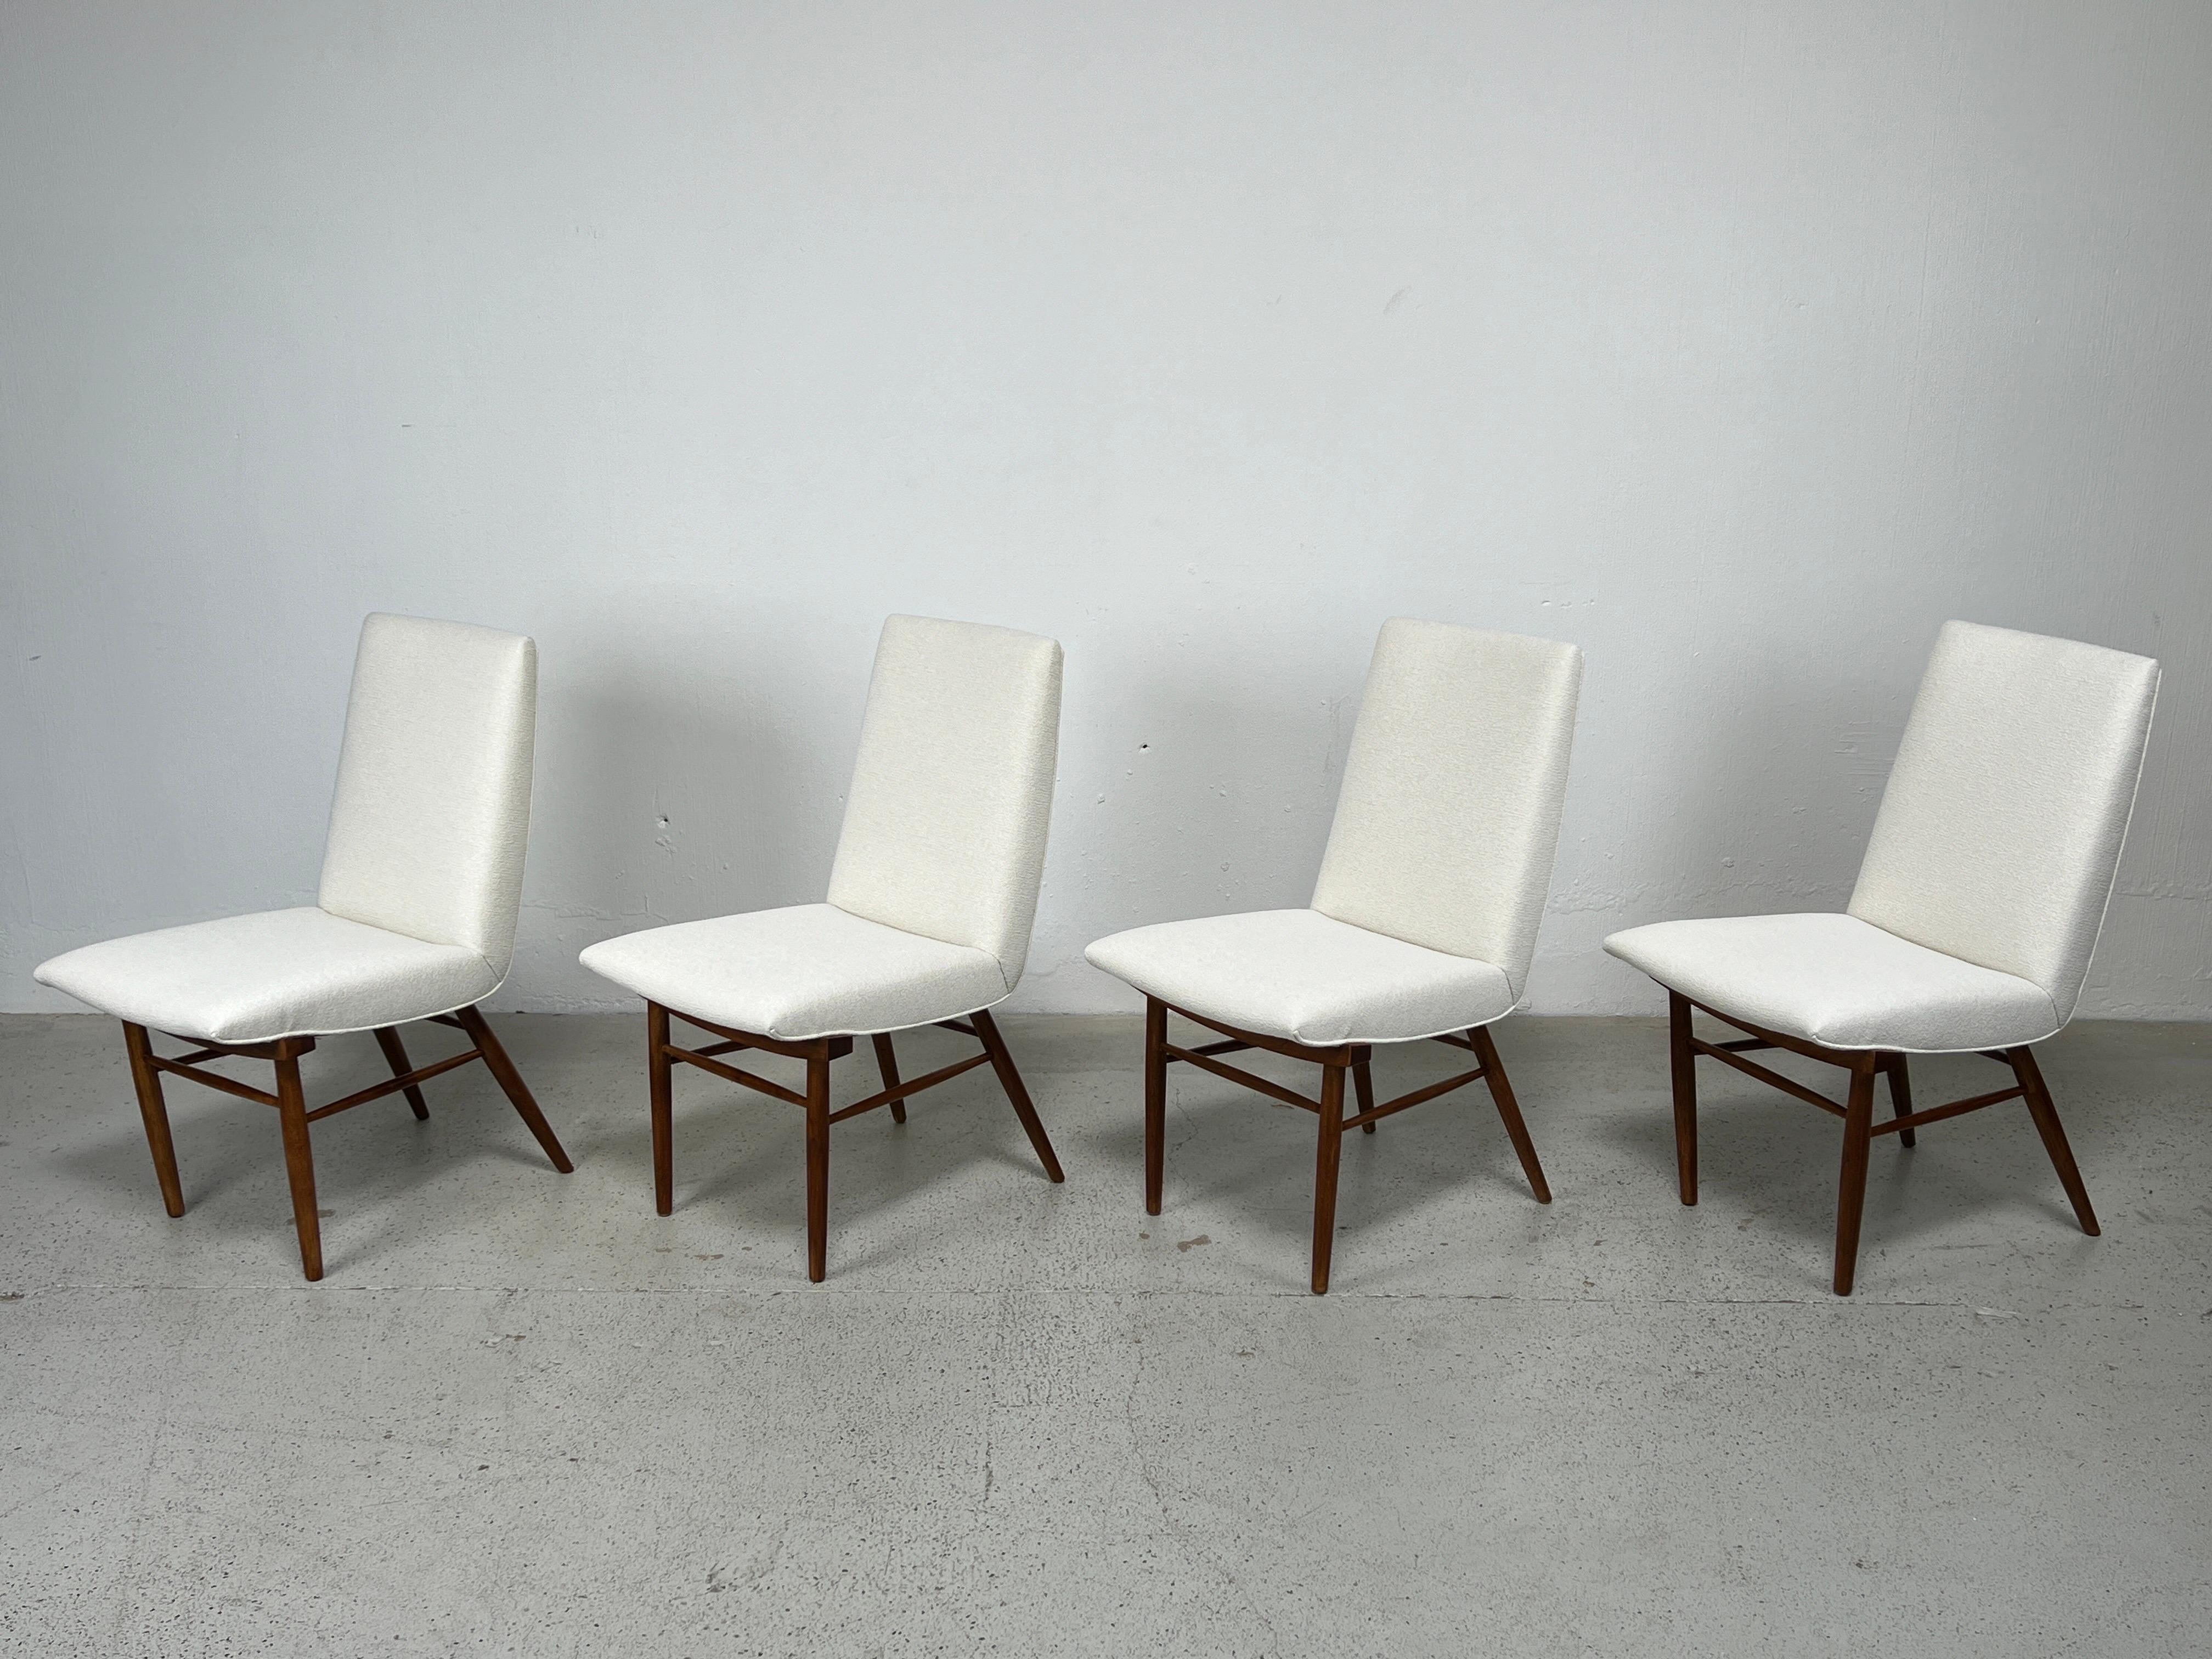 A rare set of four model 206 dining chairs designed by George Nakashima for Widdicomb. A matching fifth chair available separately. 